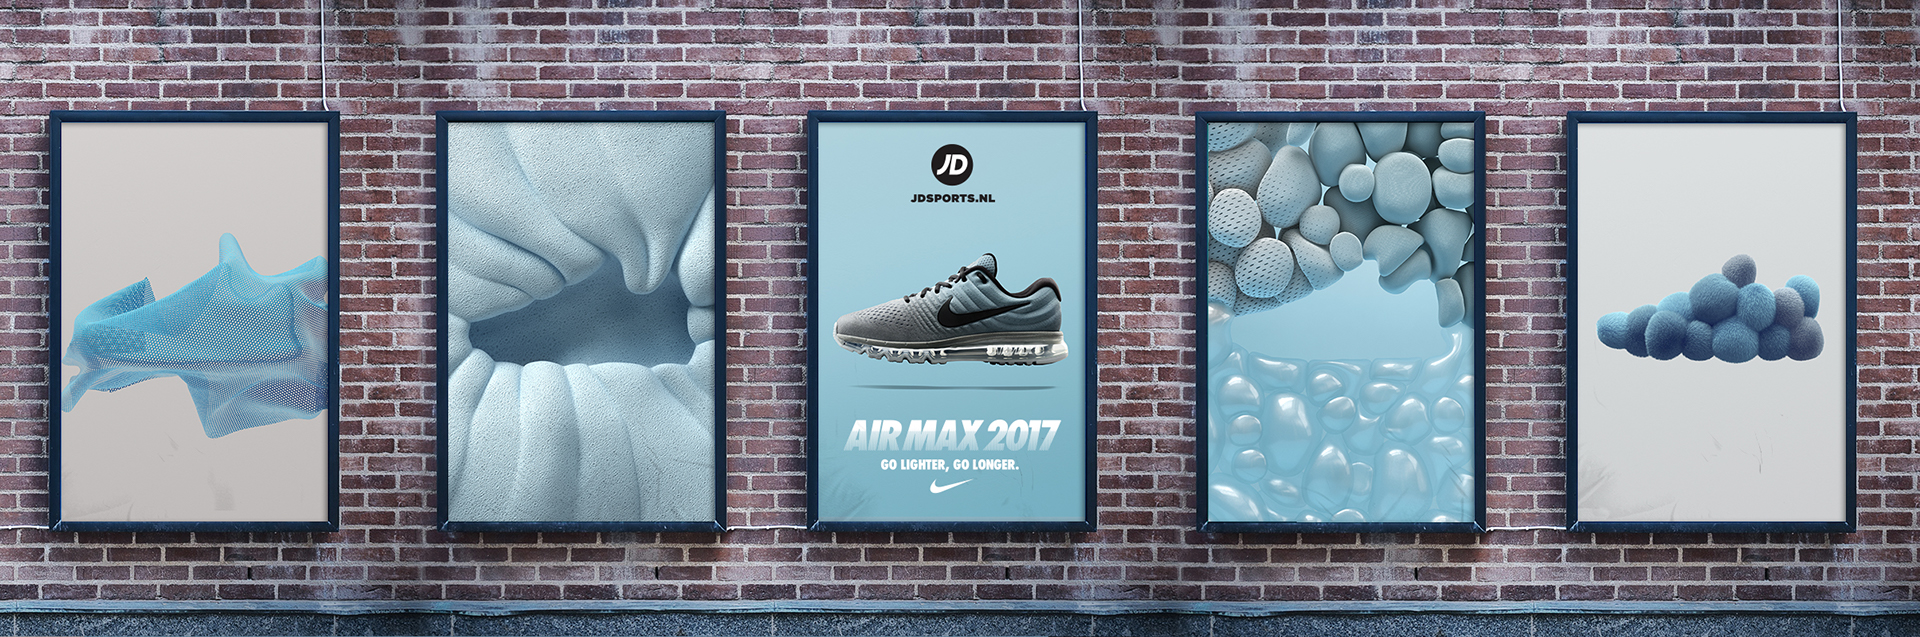 Smile Mathematical Angry Air Max '17 on Behance